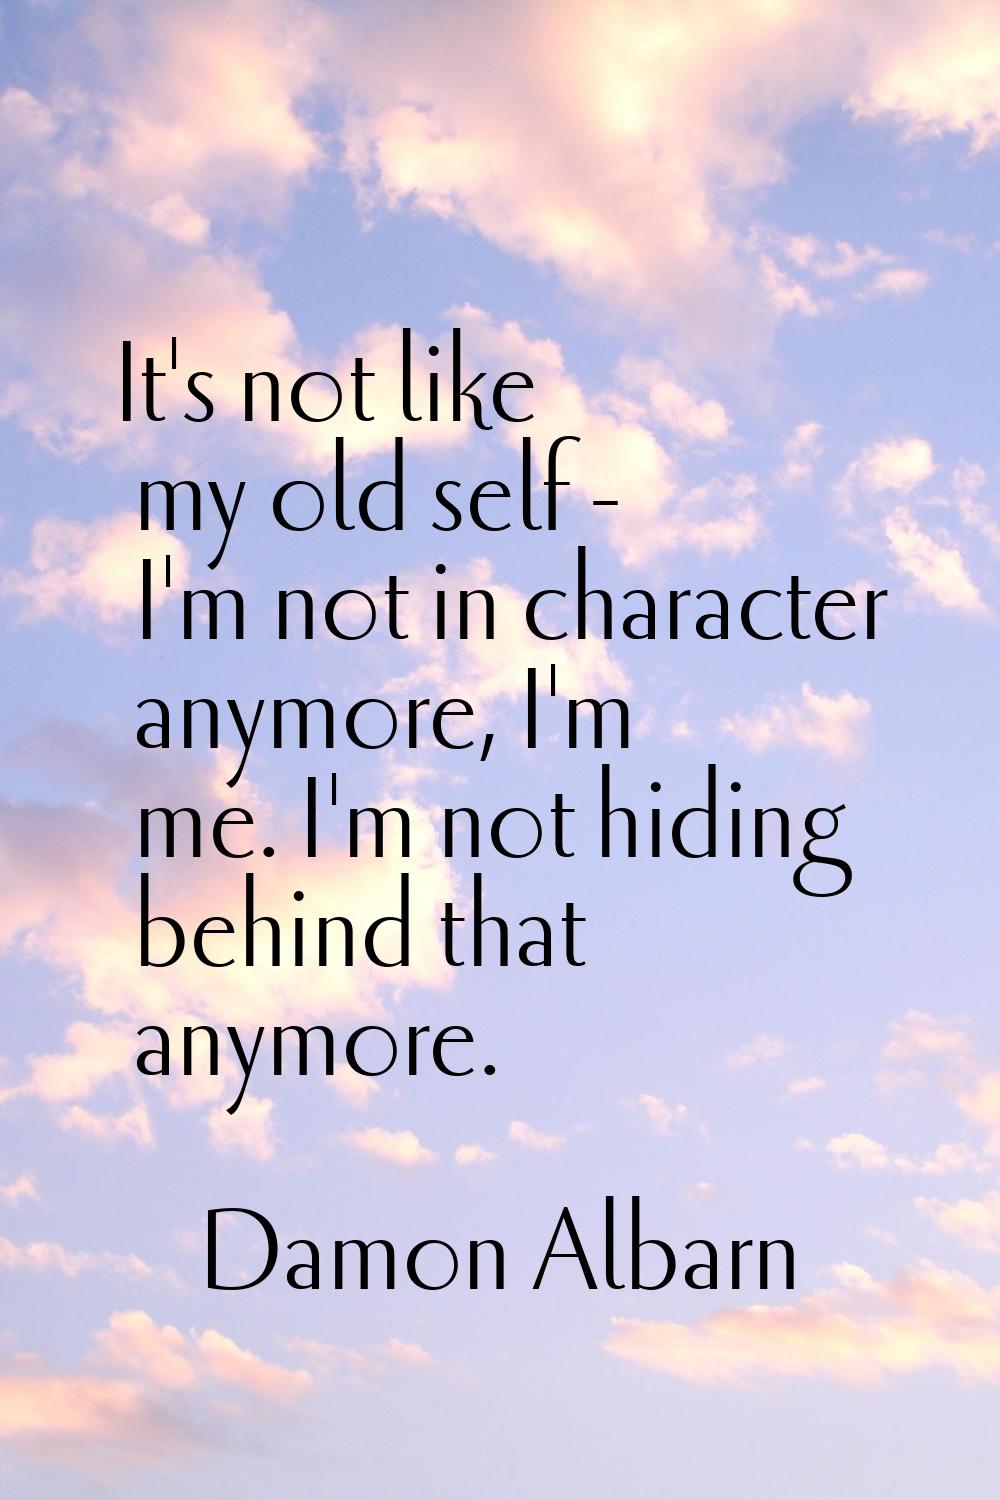 It's not like my old self - I'm not in character anymore, I'm me. I'm not hiding behind that anymor